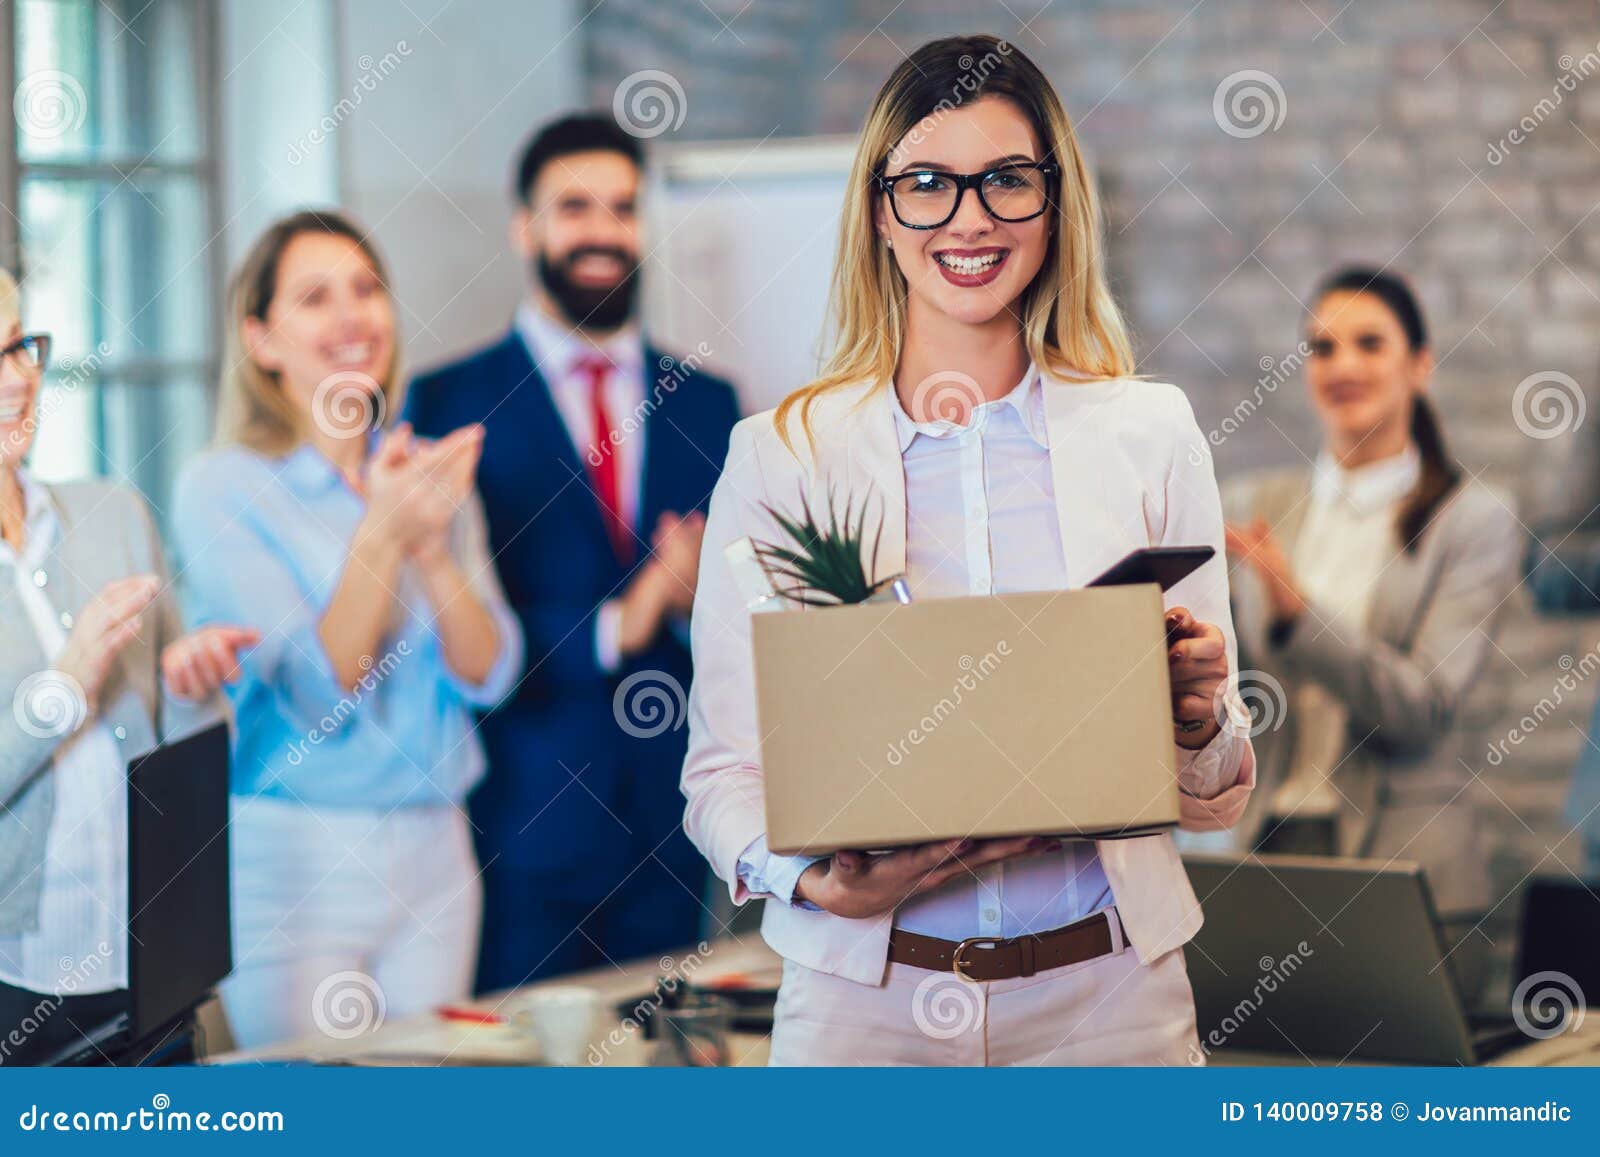 new member of team, newcomer, applauding to female employee, congratulating office worker with promotion